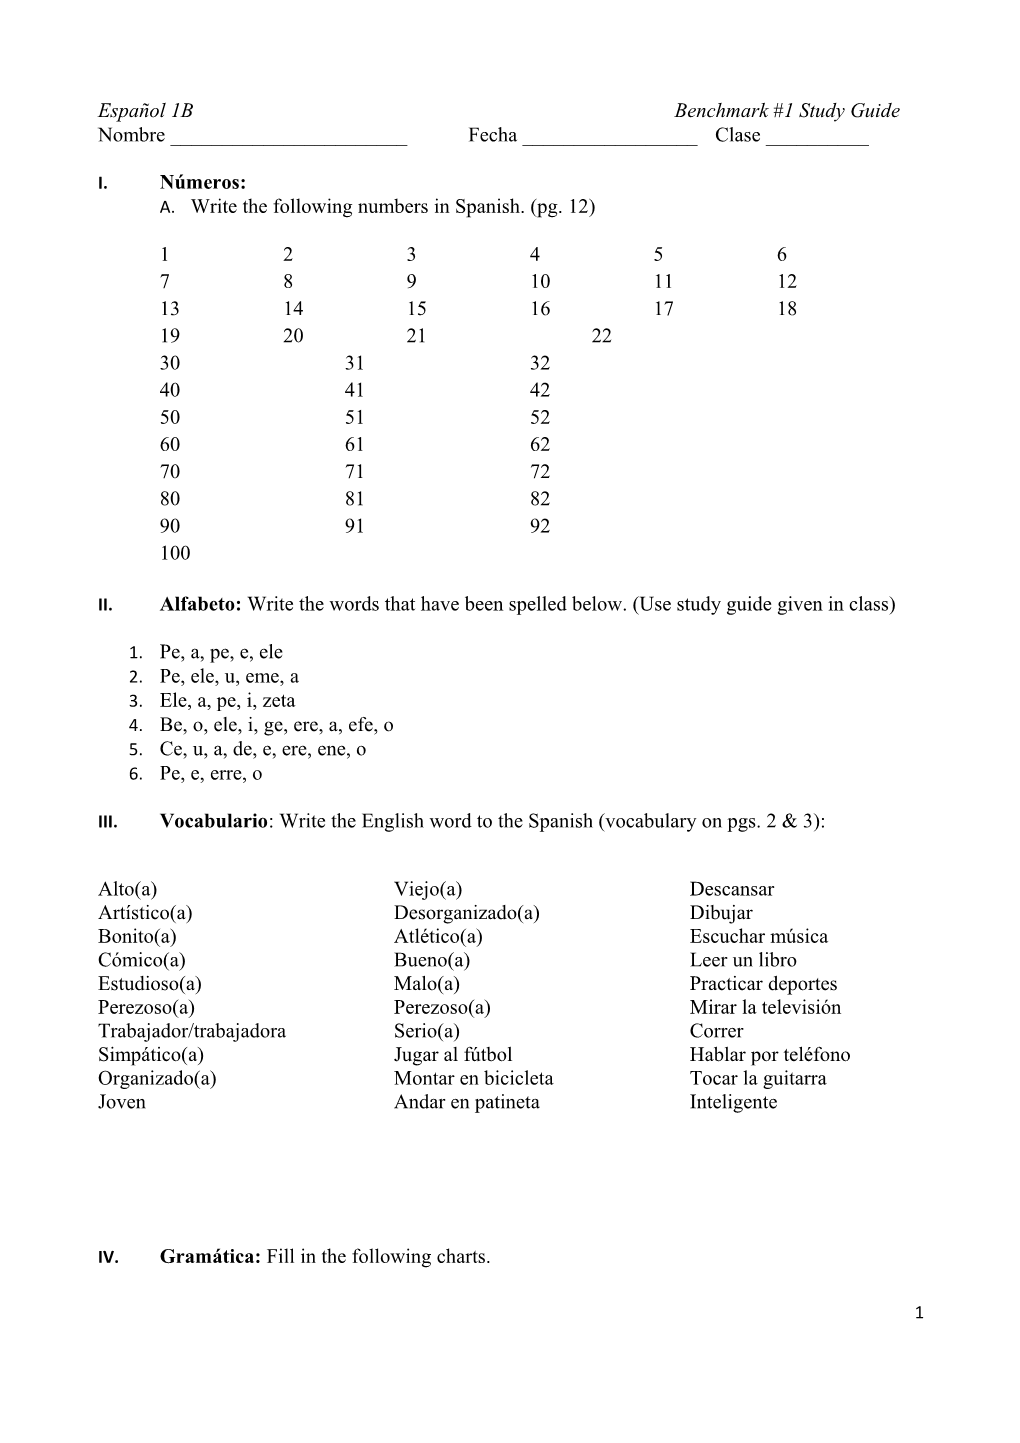 A. Write the Following Numbers in Spanish. (Pg. 12)